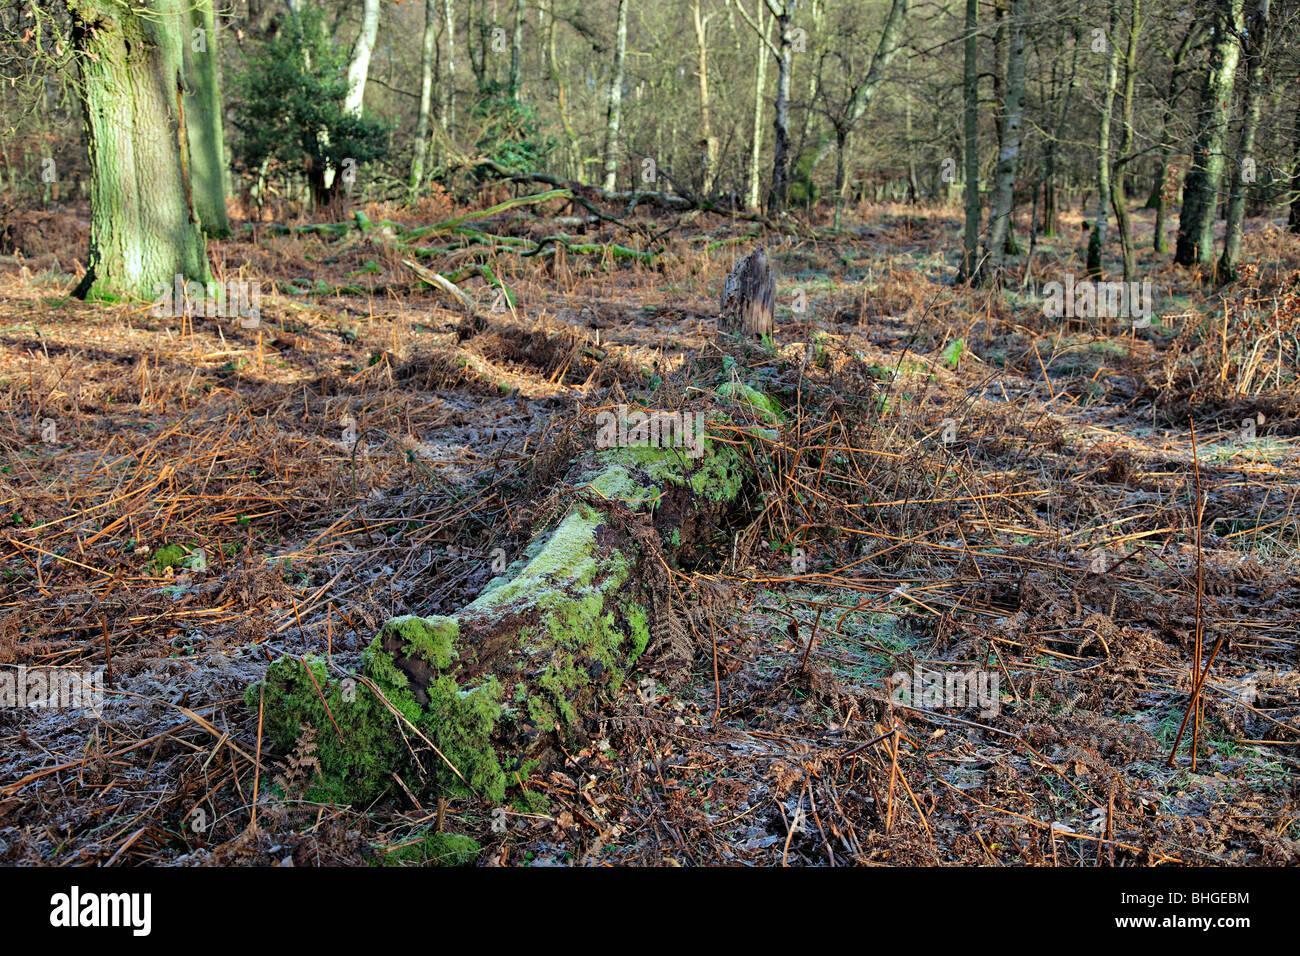 Deciduous woodland management in which fallen trees are allowed to remain to provide habitat. Stock Photo